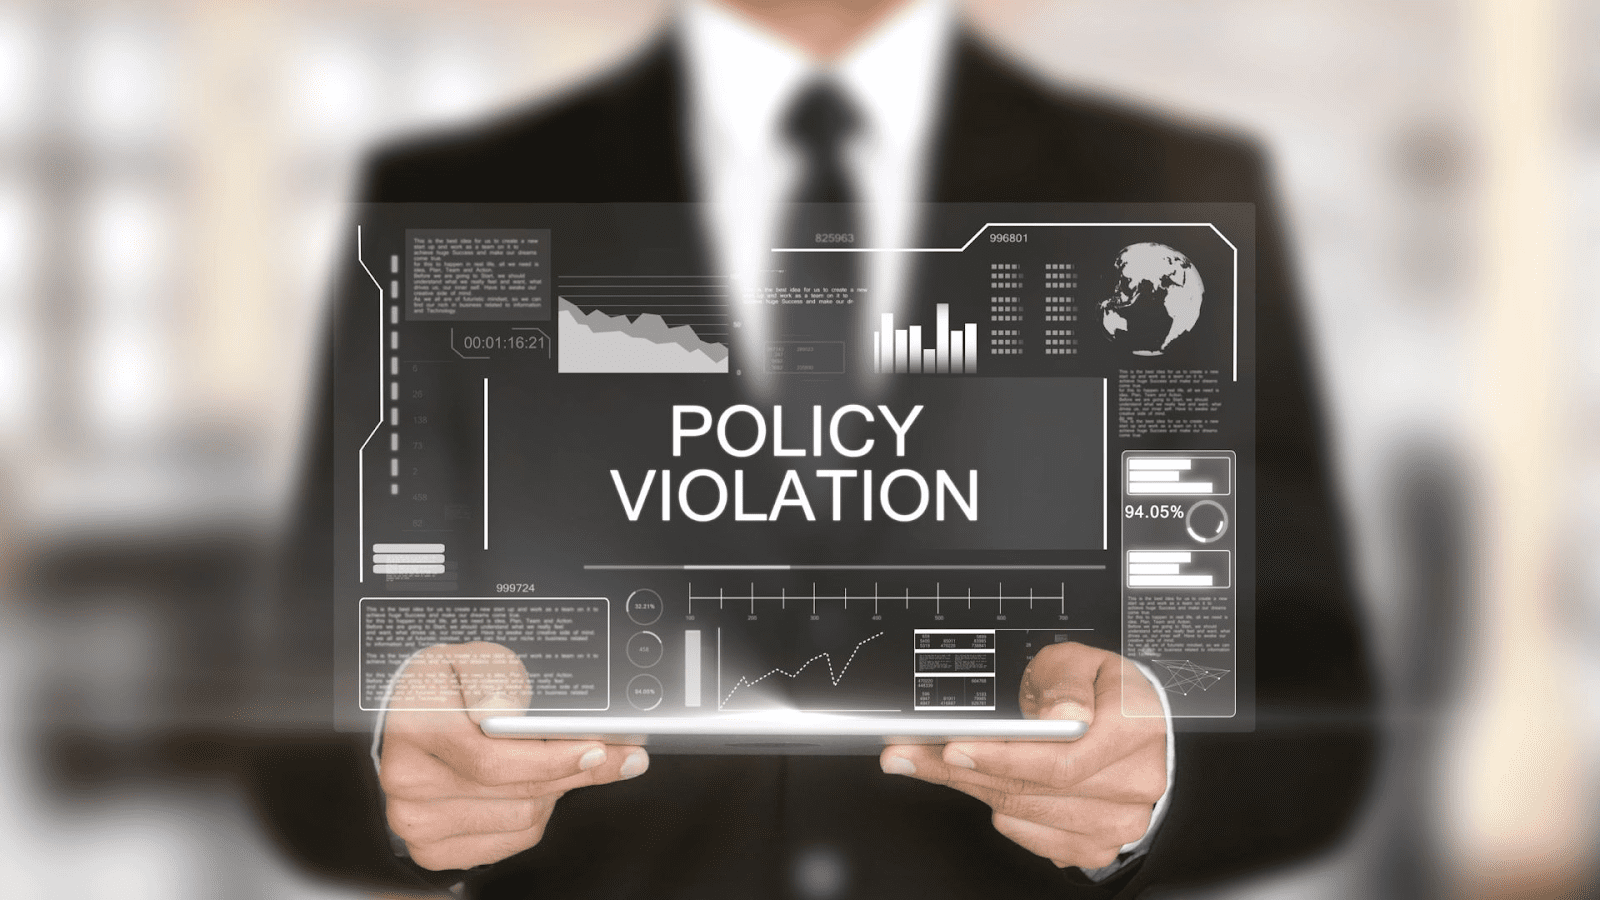 The image displays a person in a business suit holding a transparent futuristic display, which shows various graphs, figures, and text, prominently featuring the words "POLICY VIOLATION". The graphical elements suggest a dashboard or report typically used in corporate or analytical settings to monitor performance, compliance, or other metrics. The focus on "POLICY VIOLATION" indicates that the display might be used to report or track instances of non-compliance within an organization.